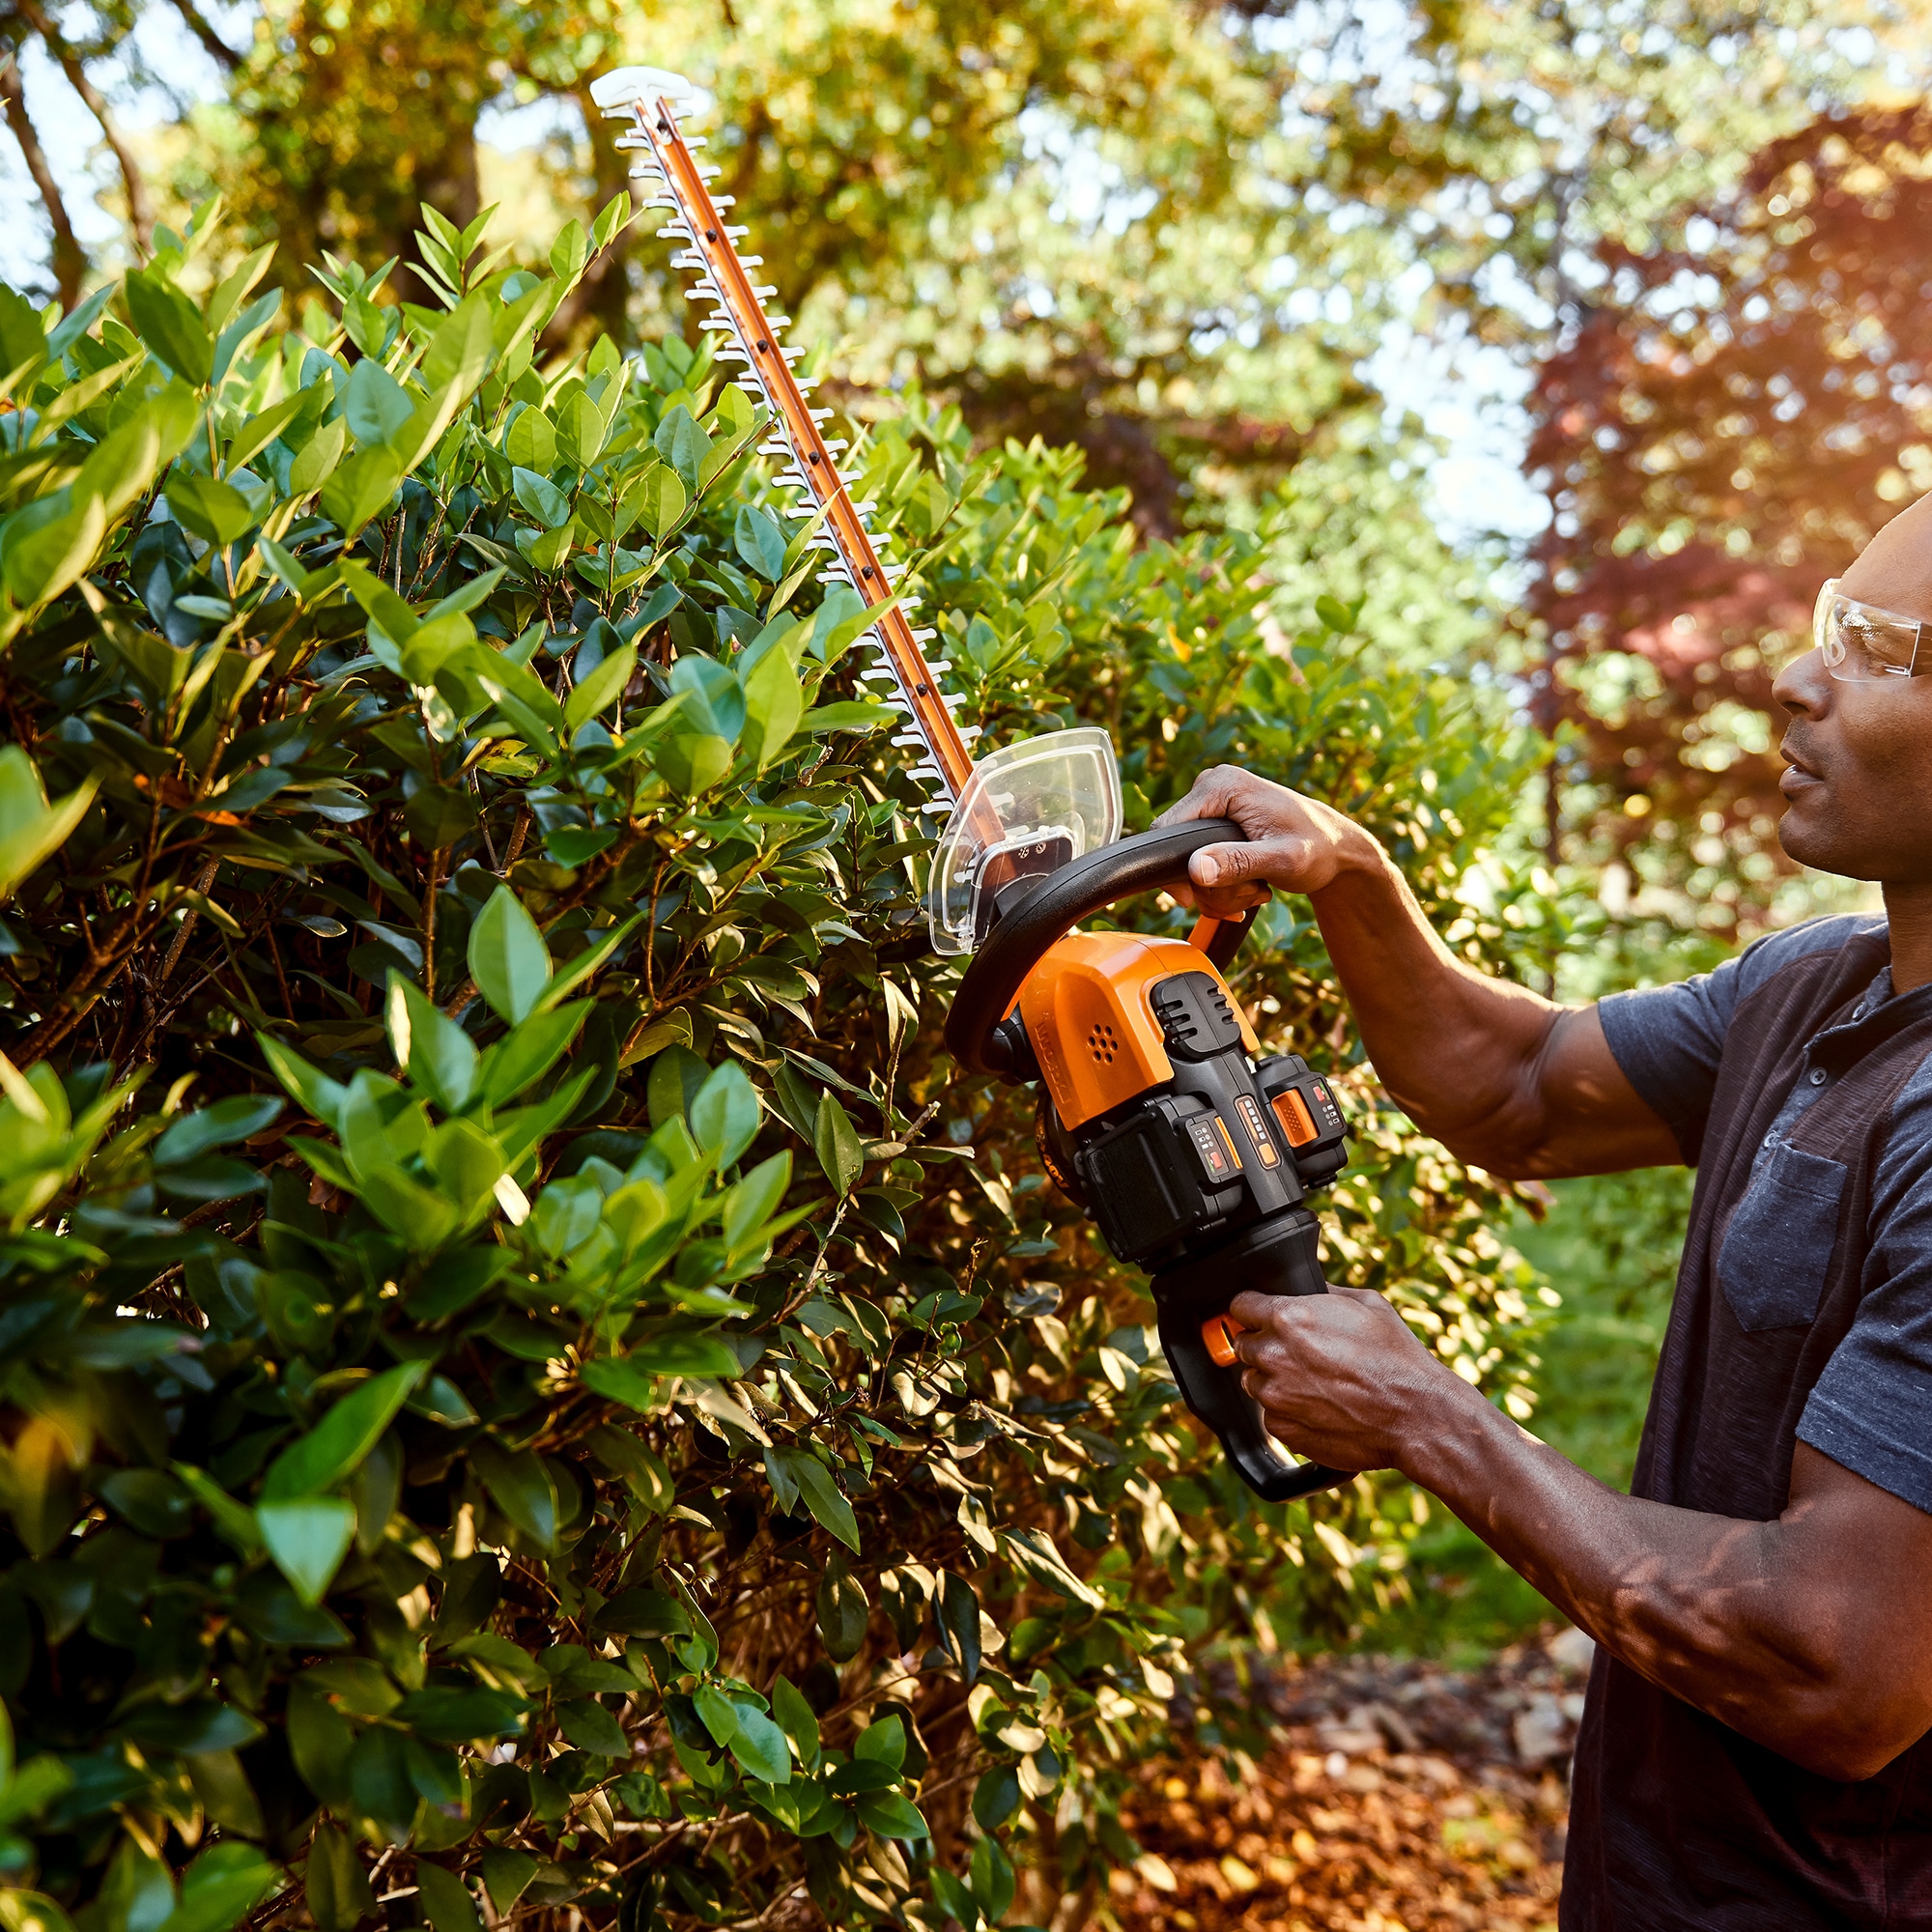 Worx Wg284.9 40v Power Share 24 Cordless Hedge Trimmer (tool Only